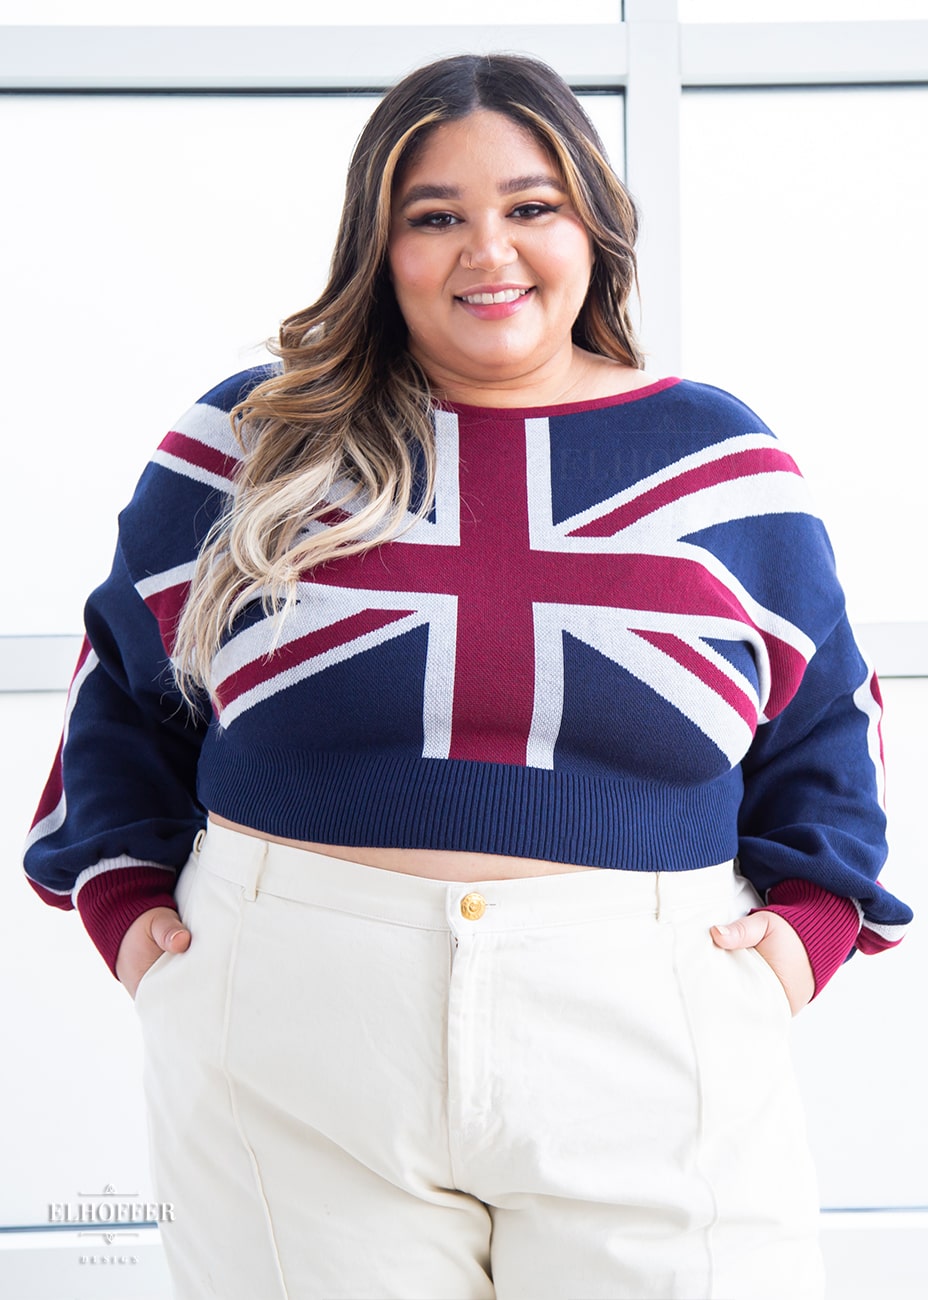 Cori, a sun kissed skinned 2xl model with long balayage hair, is smiling while wearing a cropped oversize sweater with a Union Jack design and long billowing sleeves.